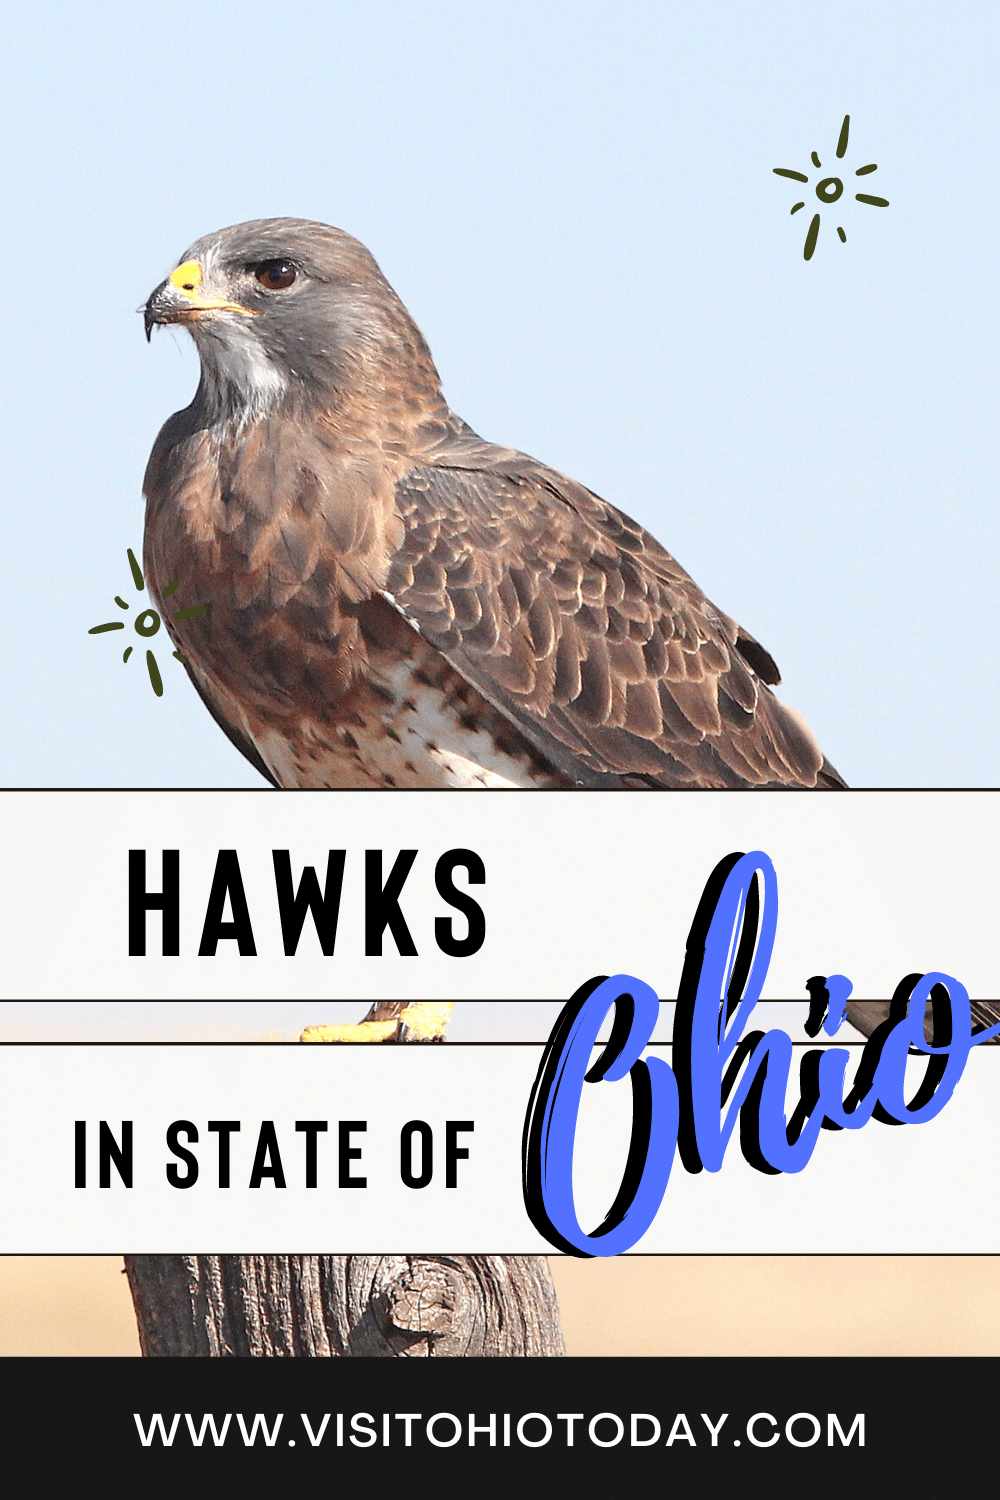 A hawk sat on a wooden perch. Text overlay saying hawks in state of Ohio